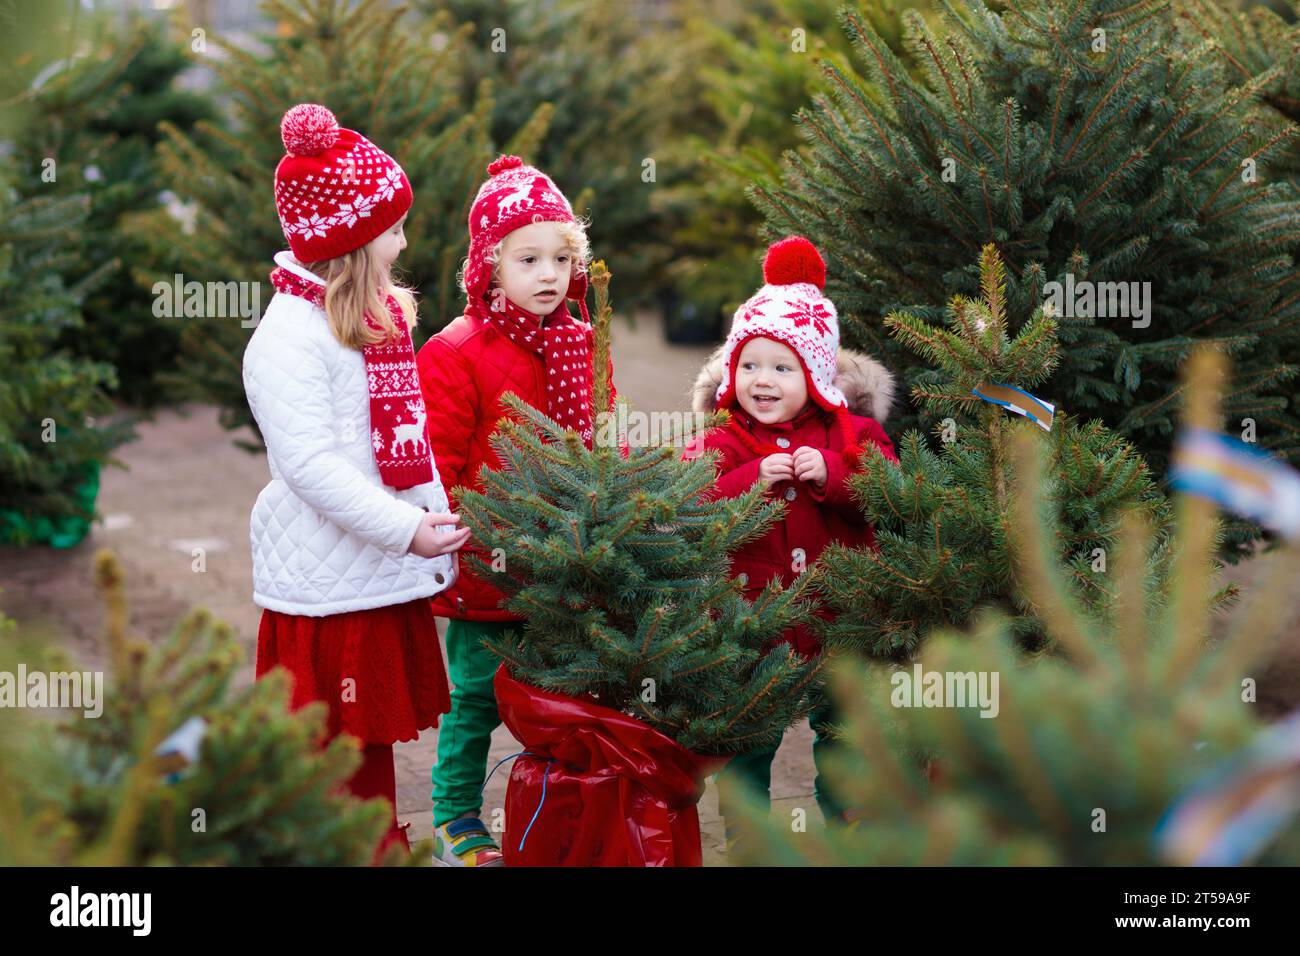 Family selecting Christmas tree. Kids choosing freshly cut Norway Xmas tree at outdoor lot. Children buying gifts at winter fair. Stock Photo